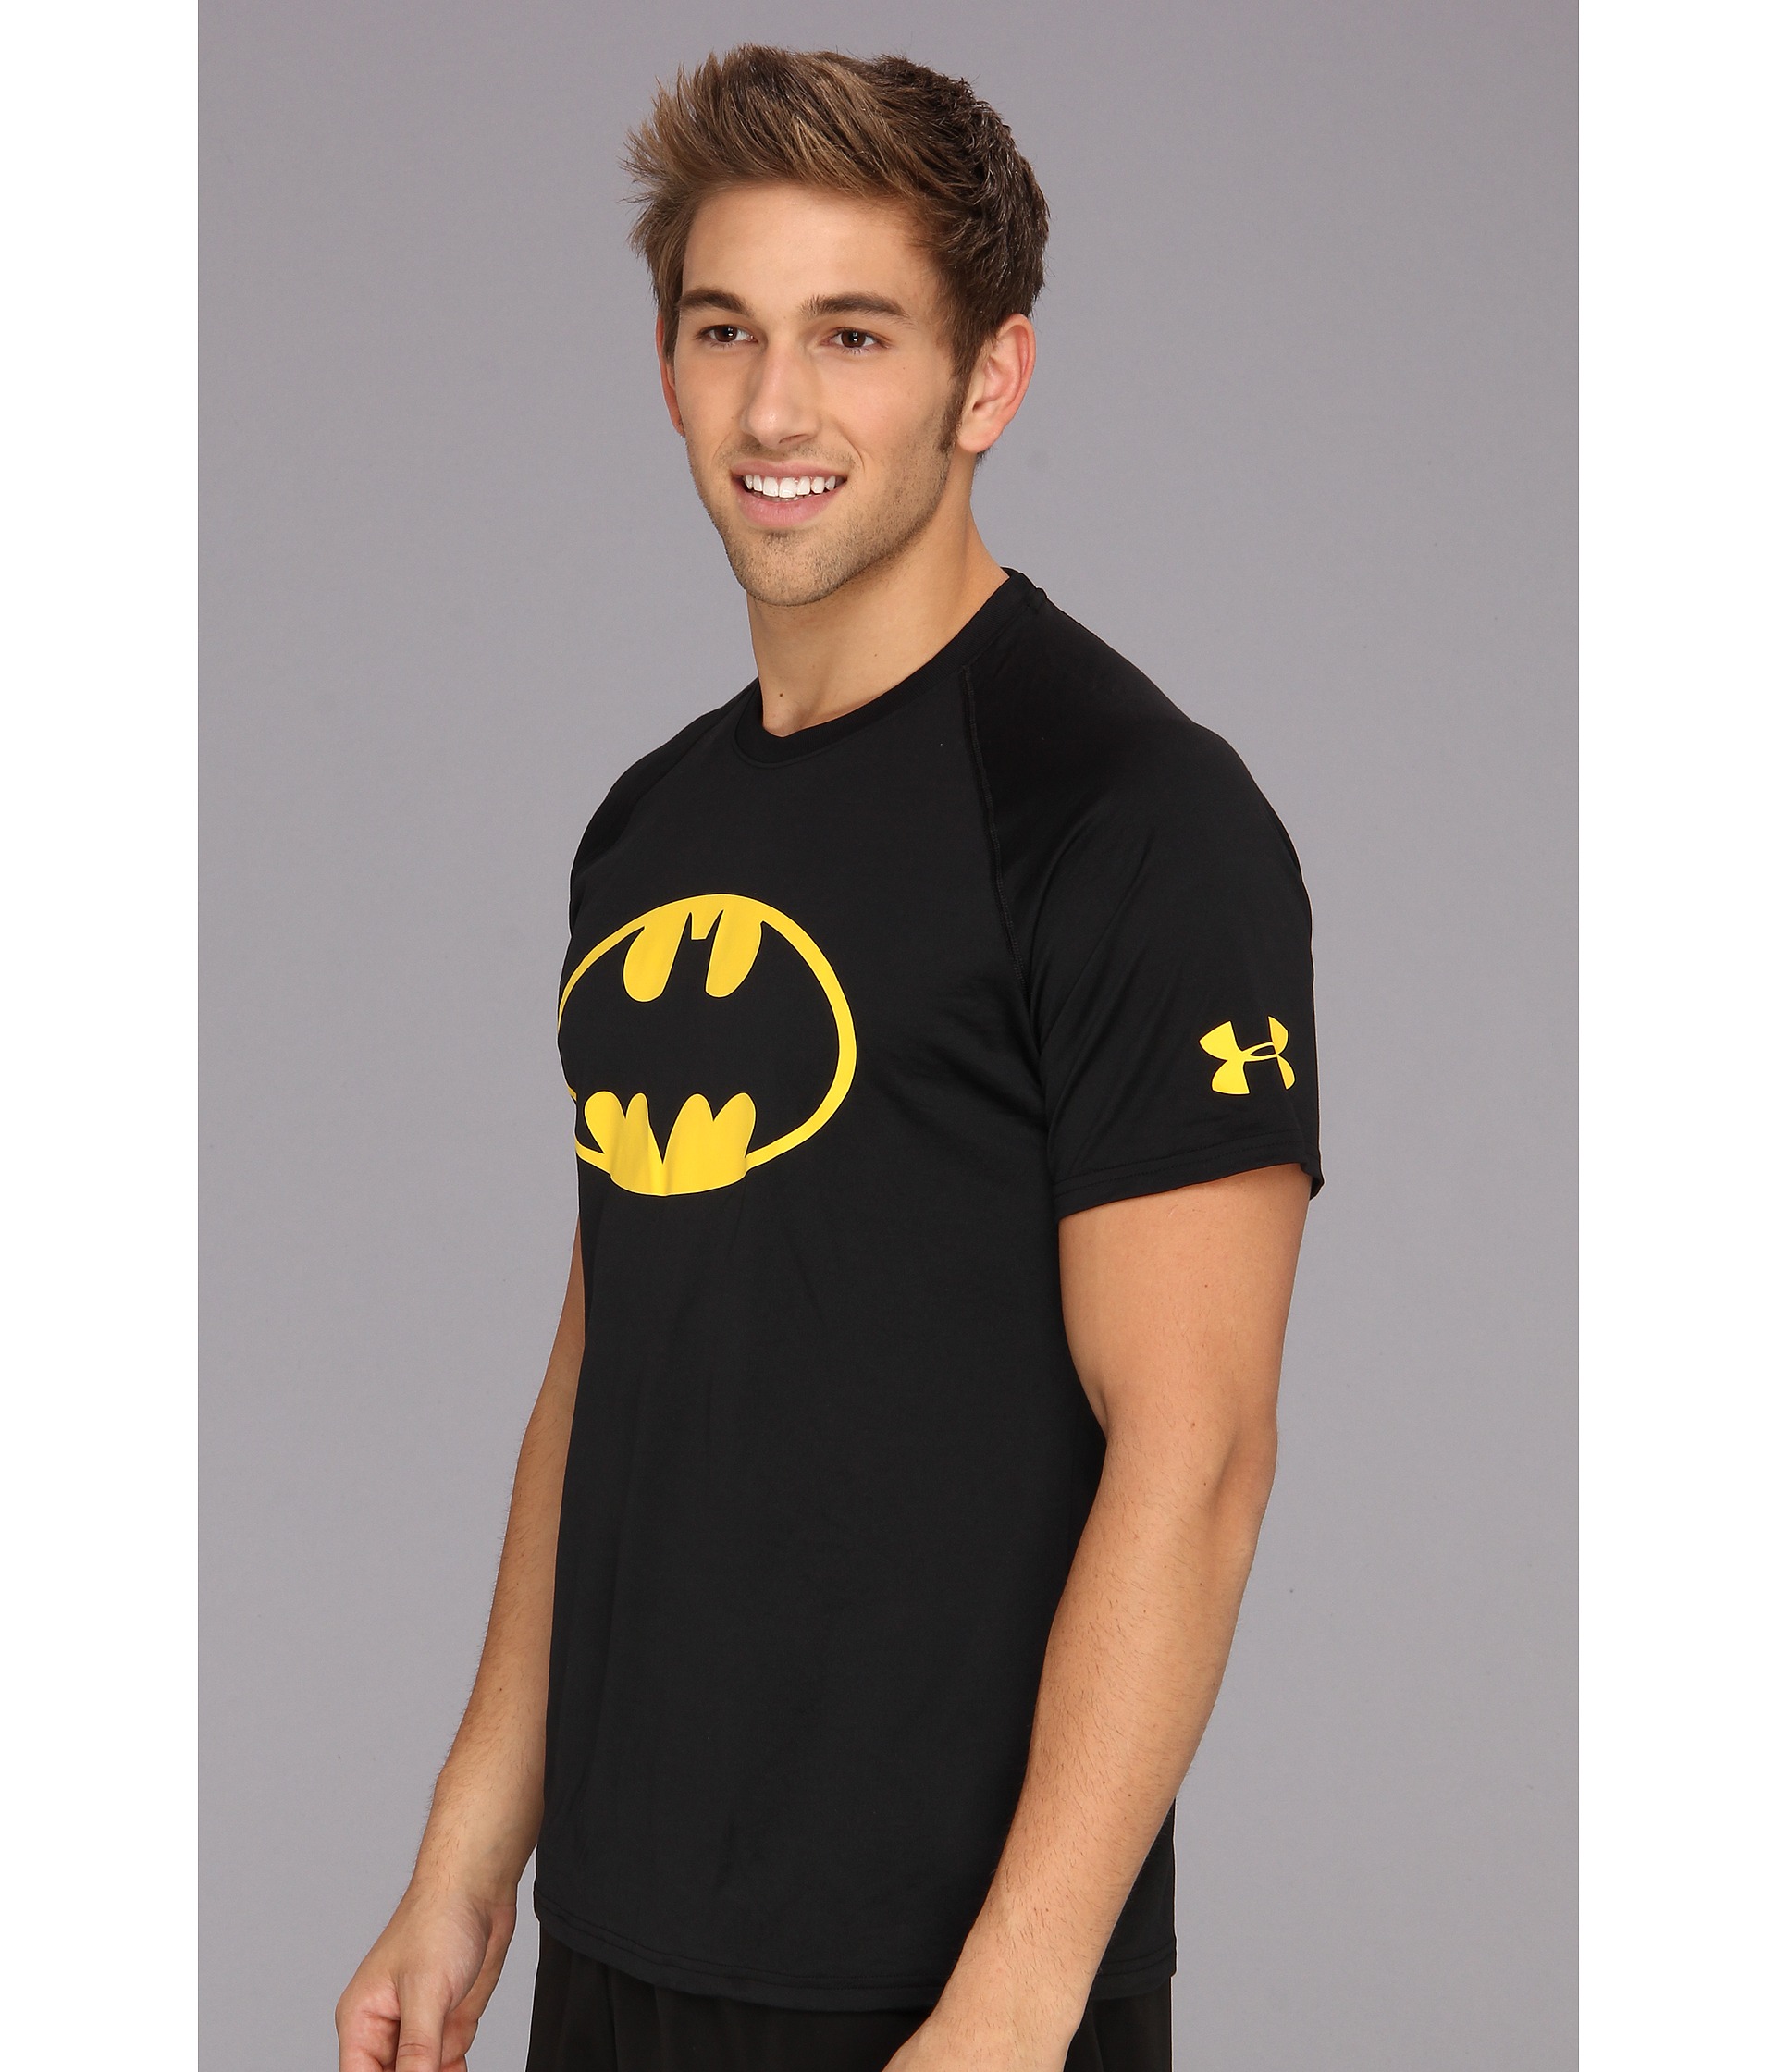 Under Armour Alter Ego Batman T Shirt | Shipped Free at Zappos